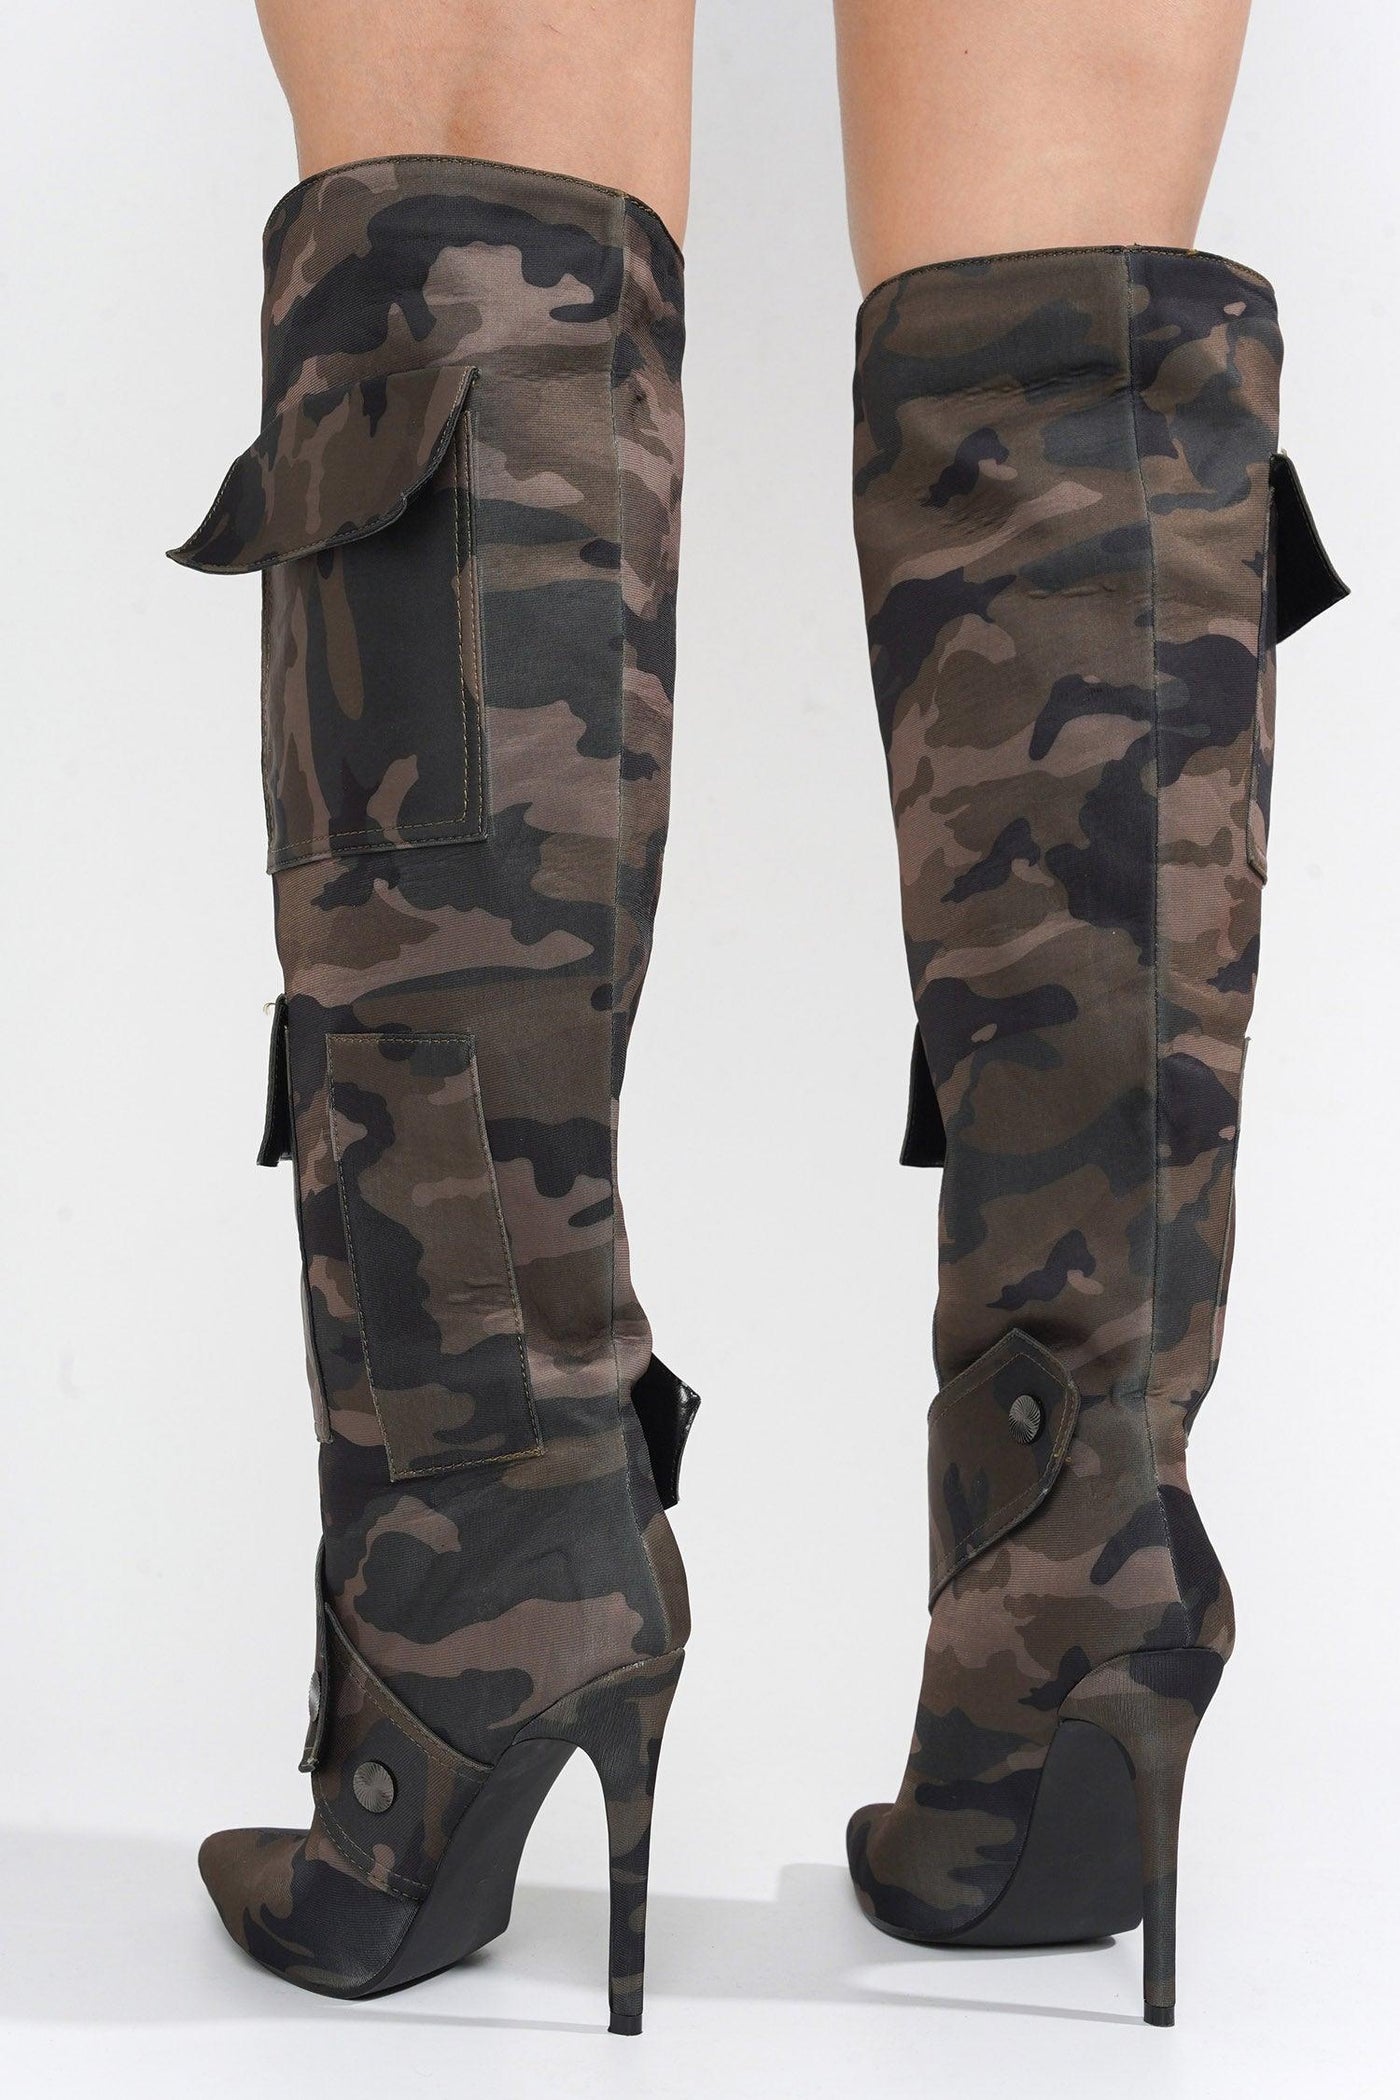 VIRDEN - CAMOUFLAGE Thigh High Boots - AMIClubwear